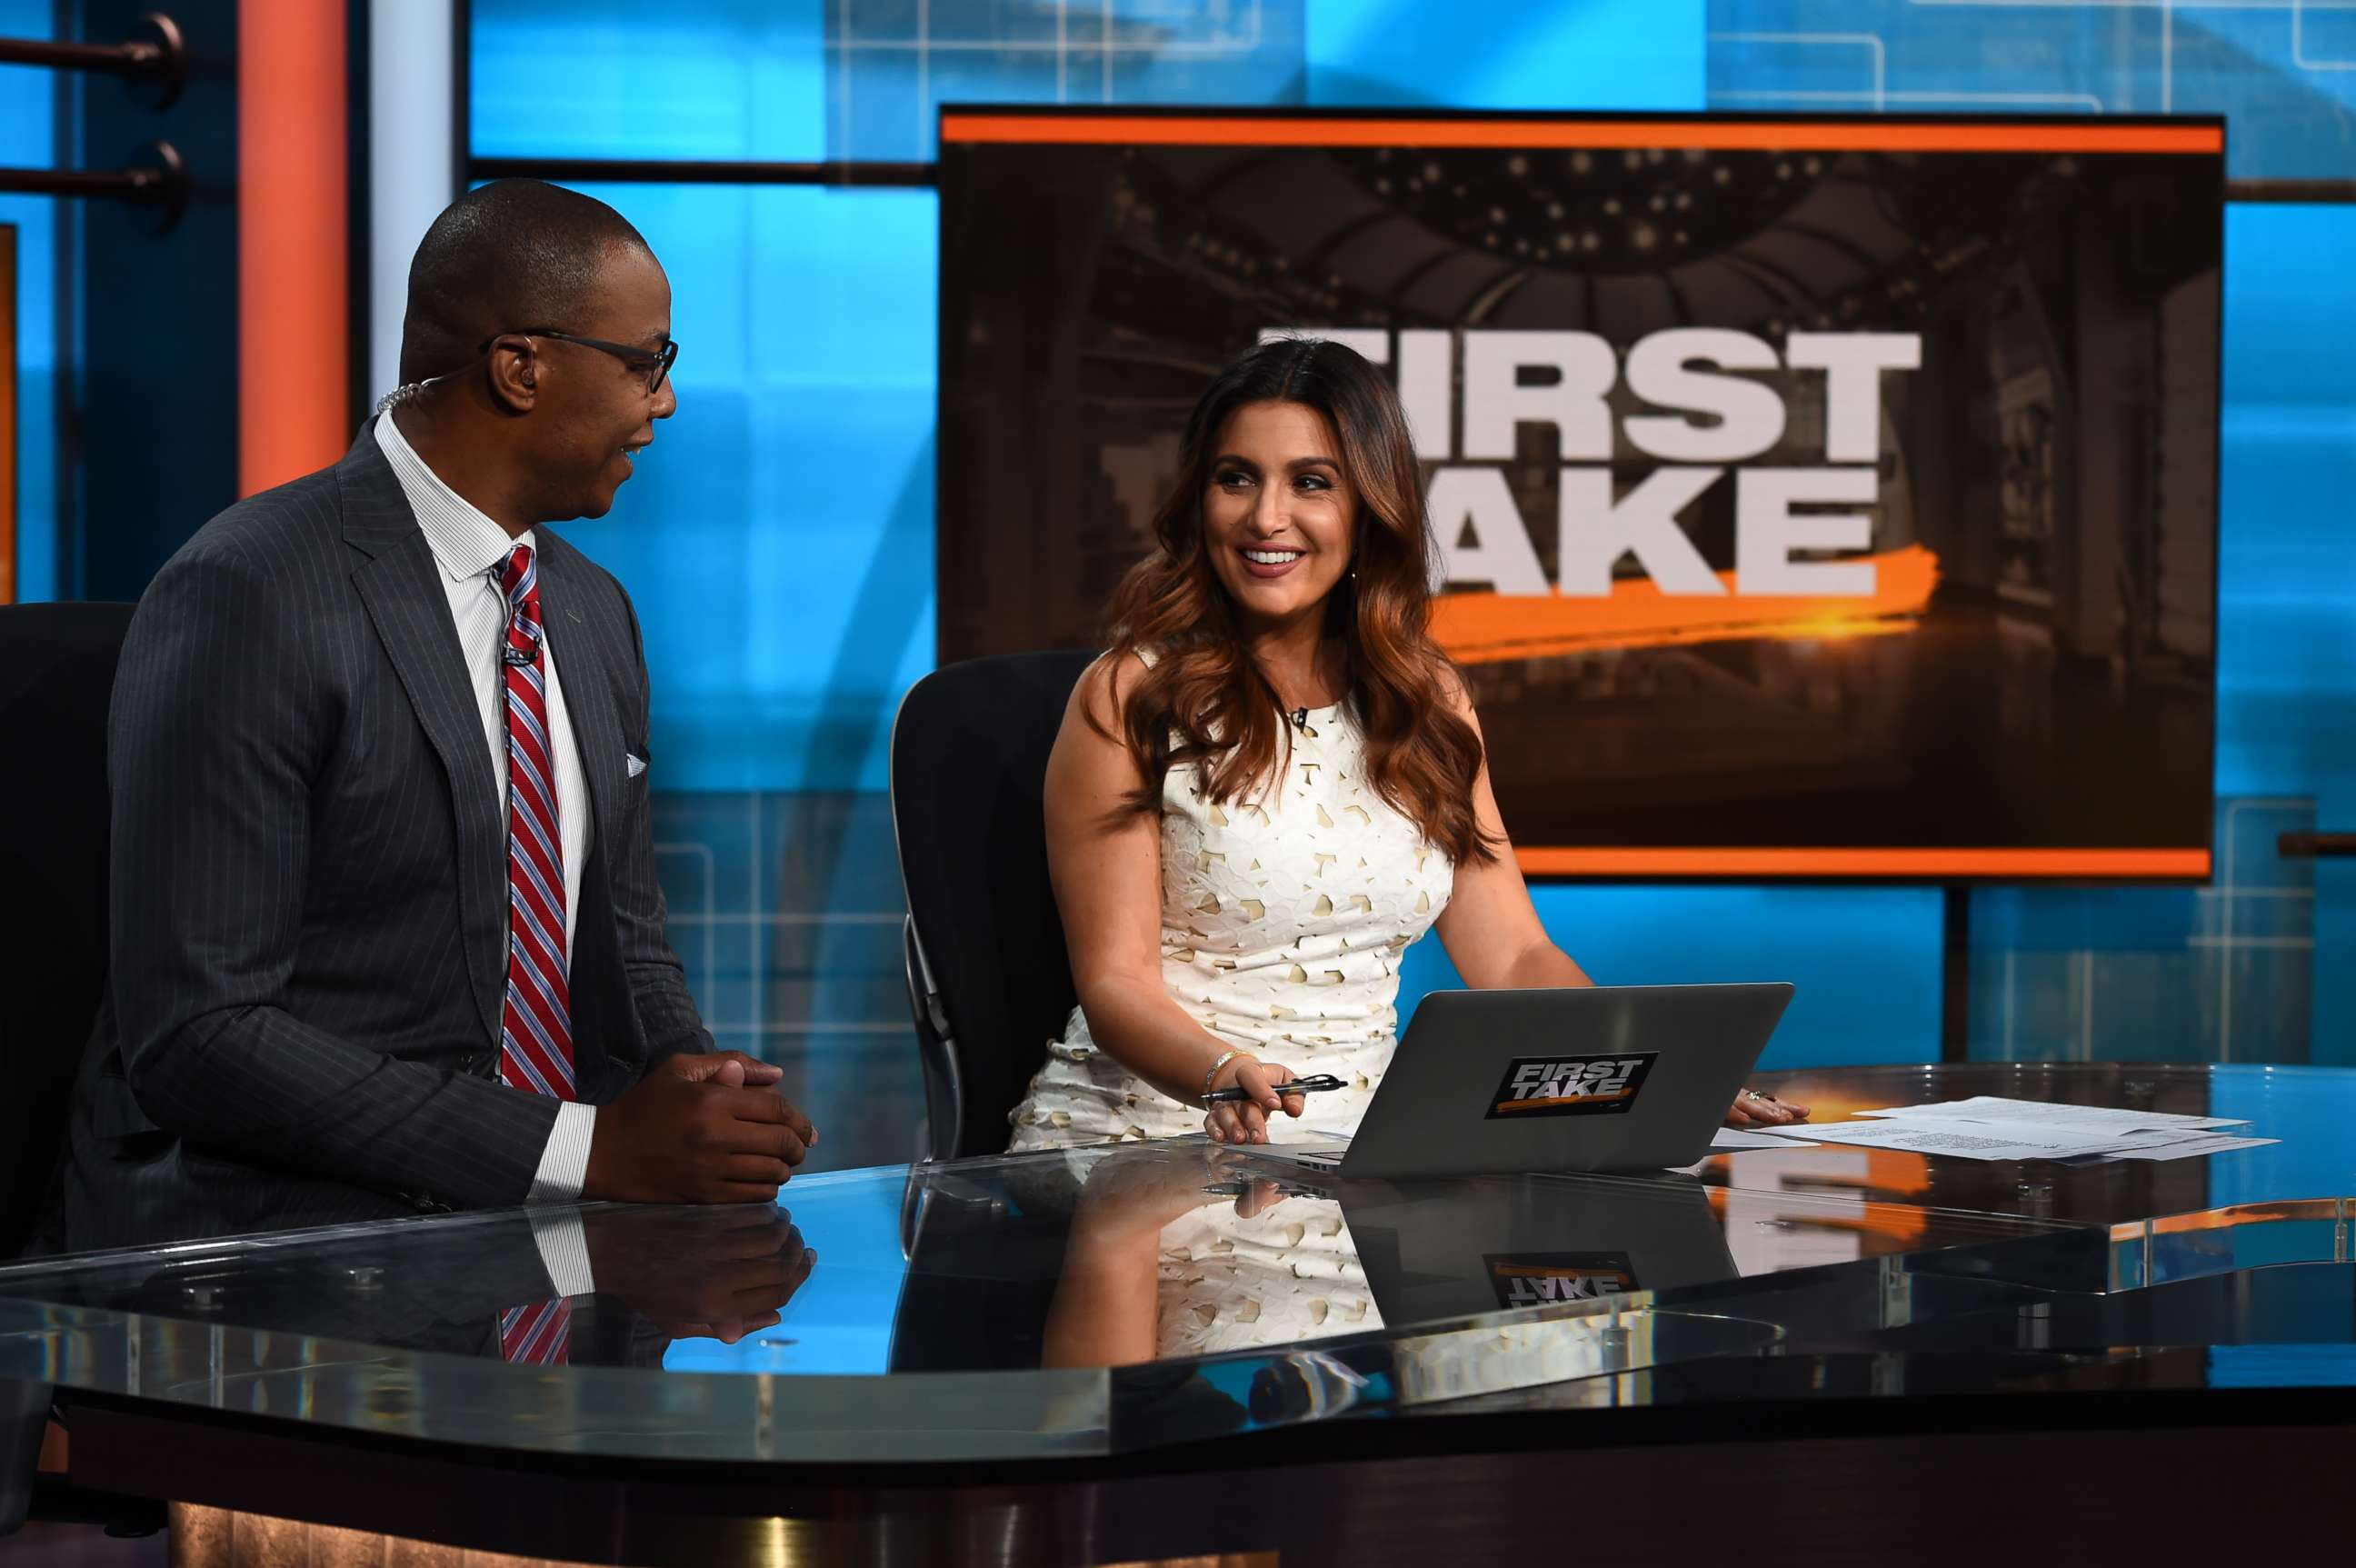 PHOTO: Caron Butler and Molly Qerim on the set of First Take.